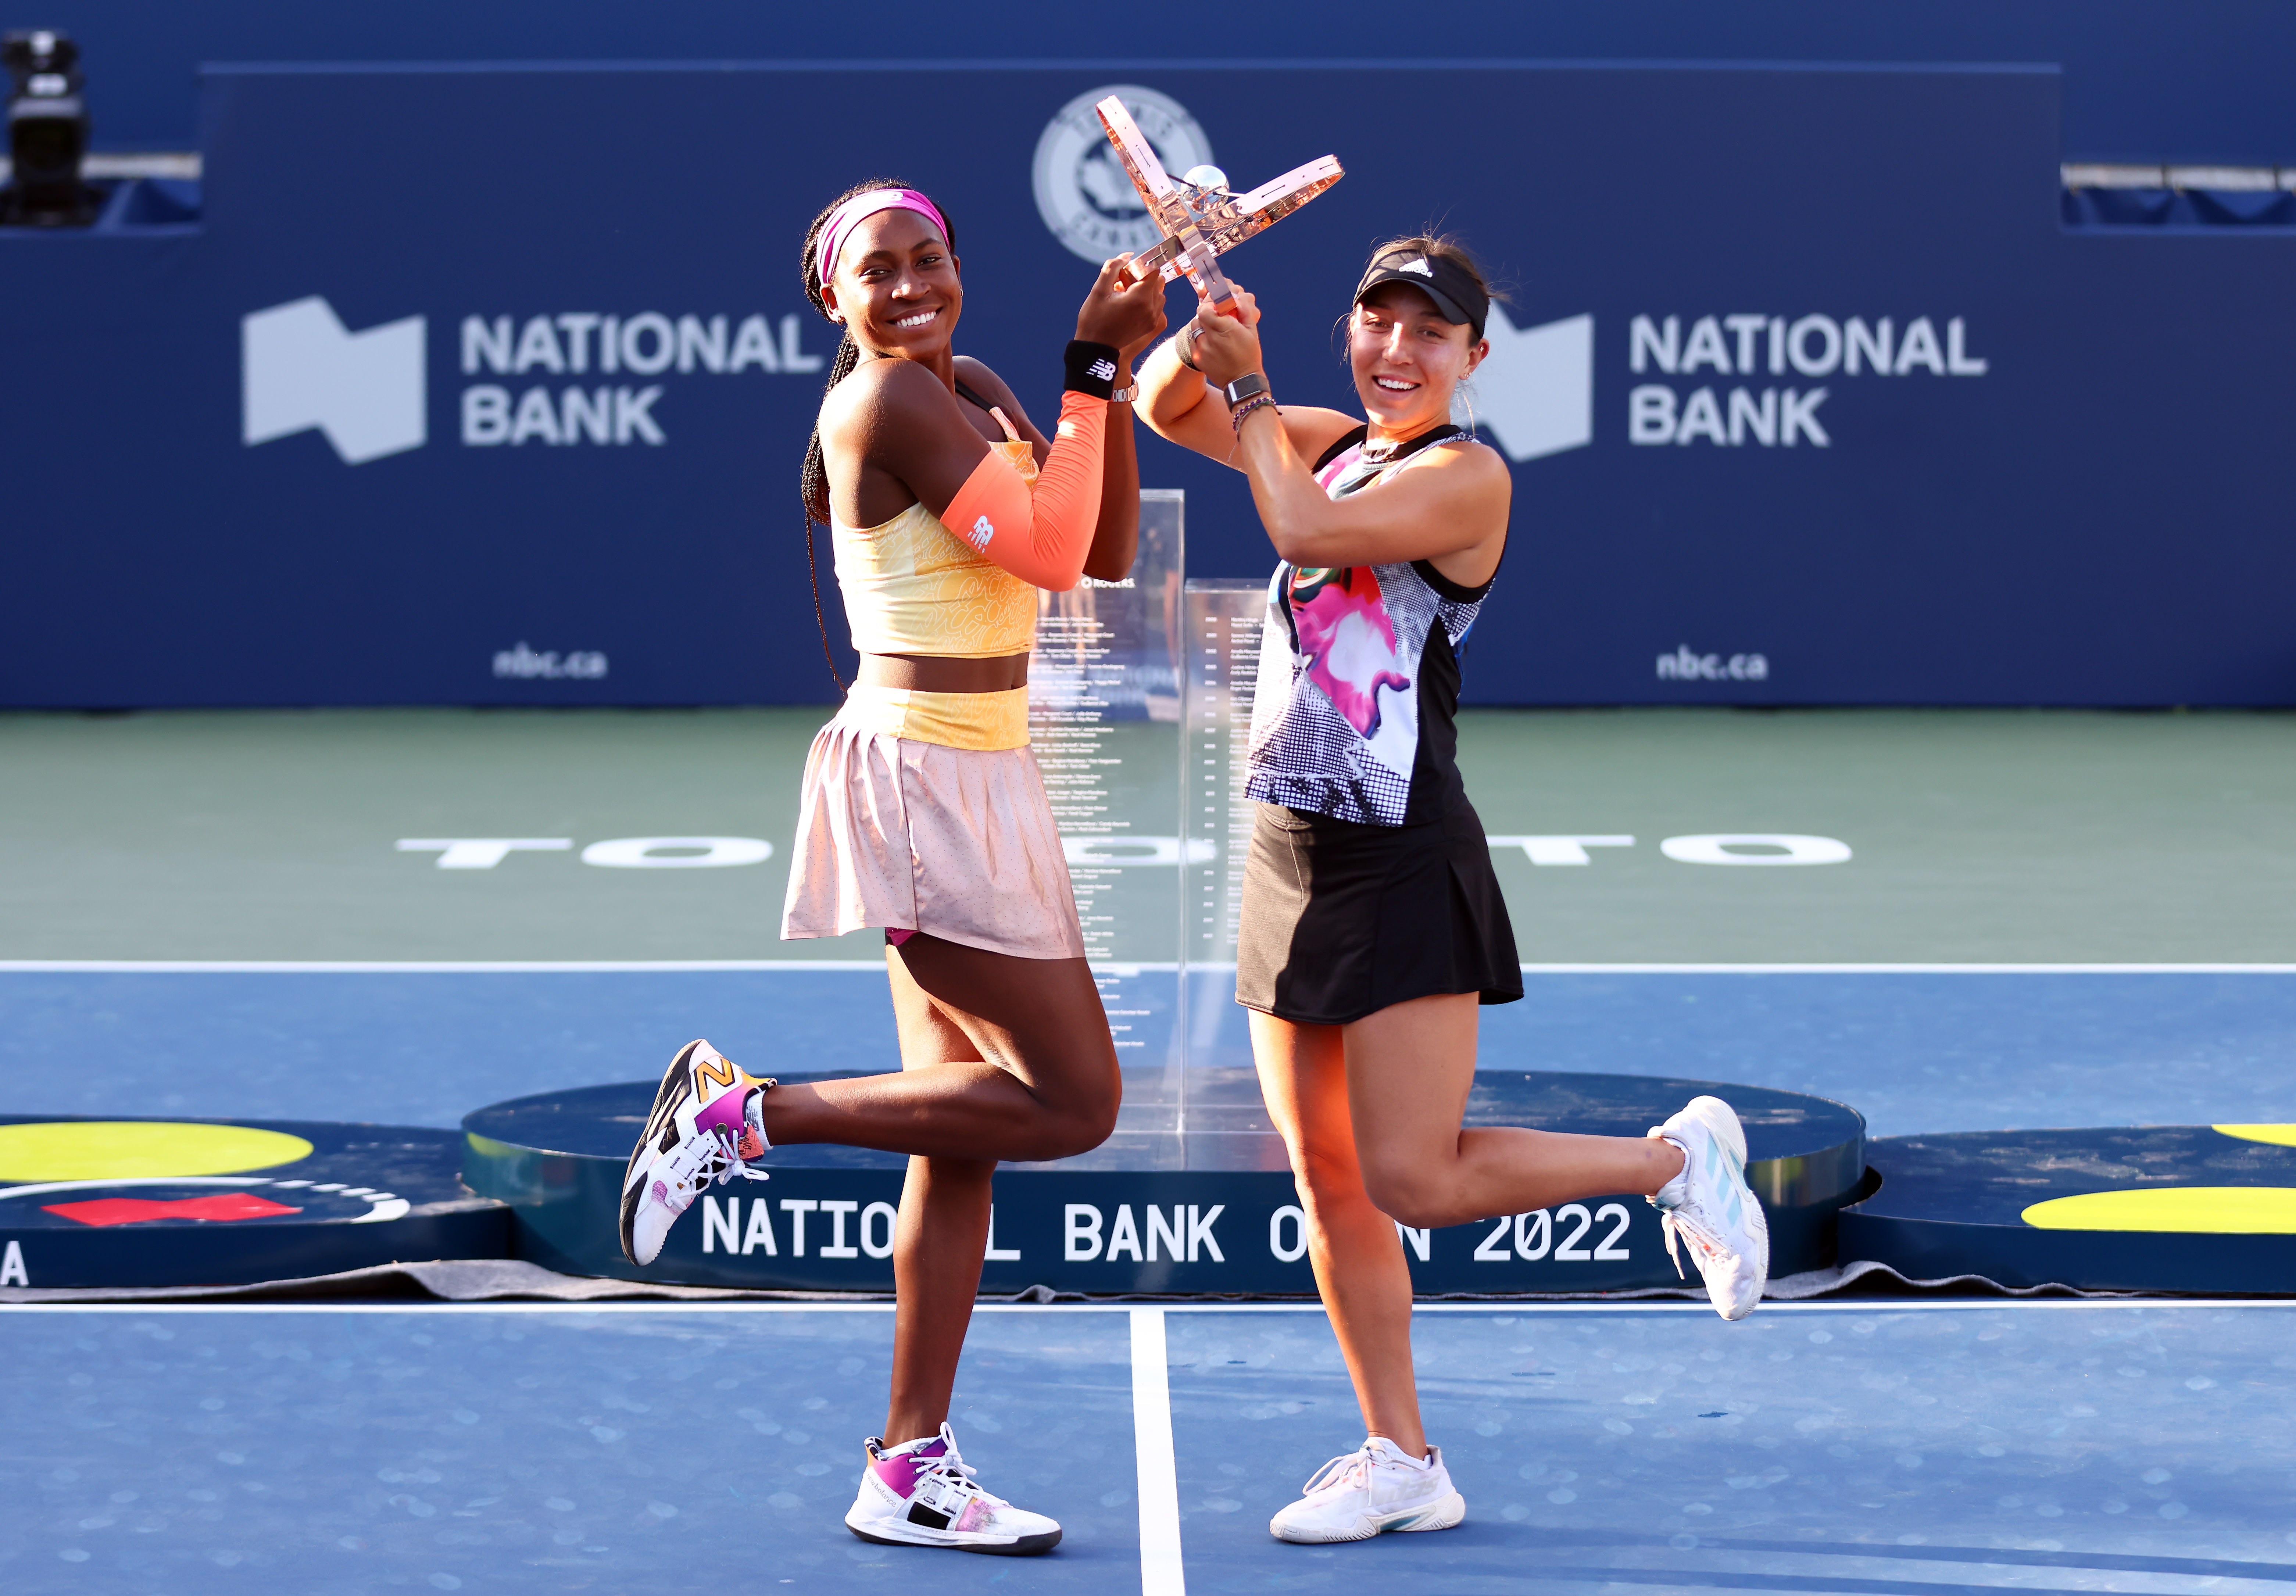 Gauff, Pegula charge to doubles title in Doha